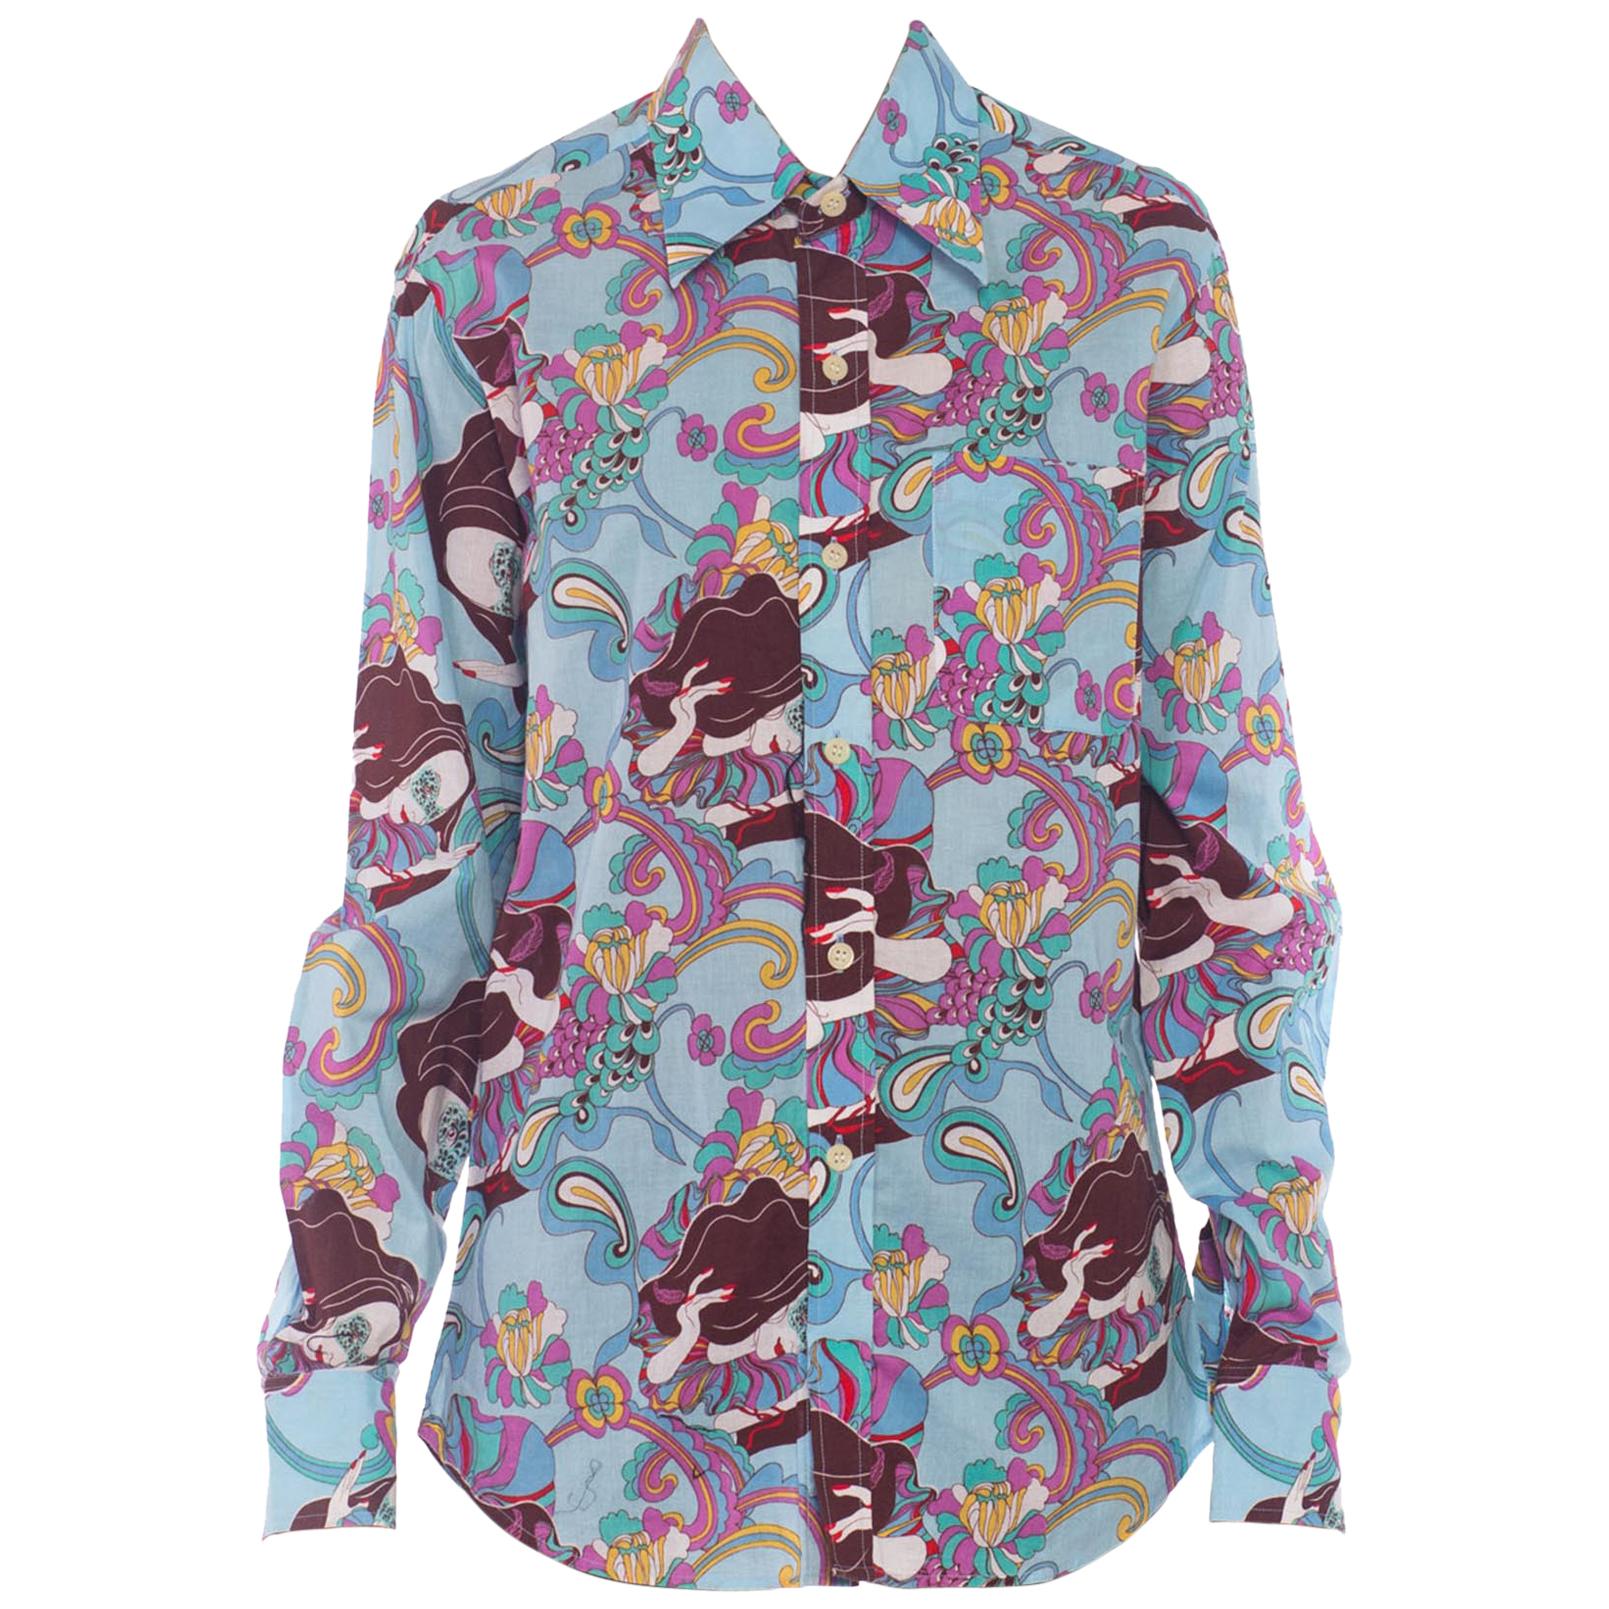 1970s Trippy Psychedelic Cotton Shirt with Masked Lady